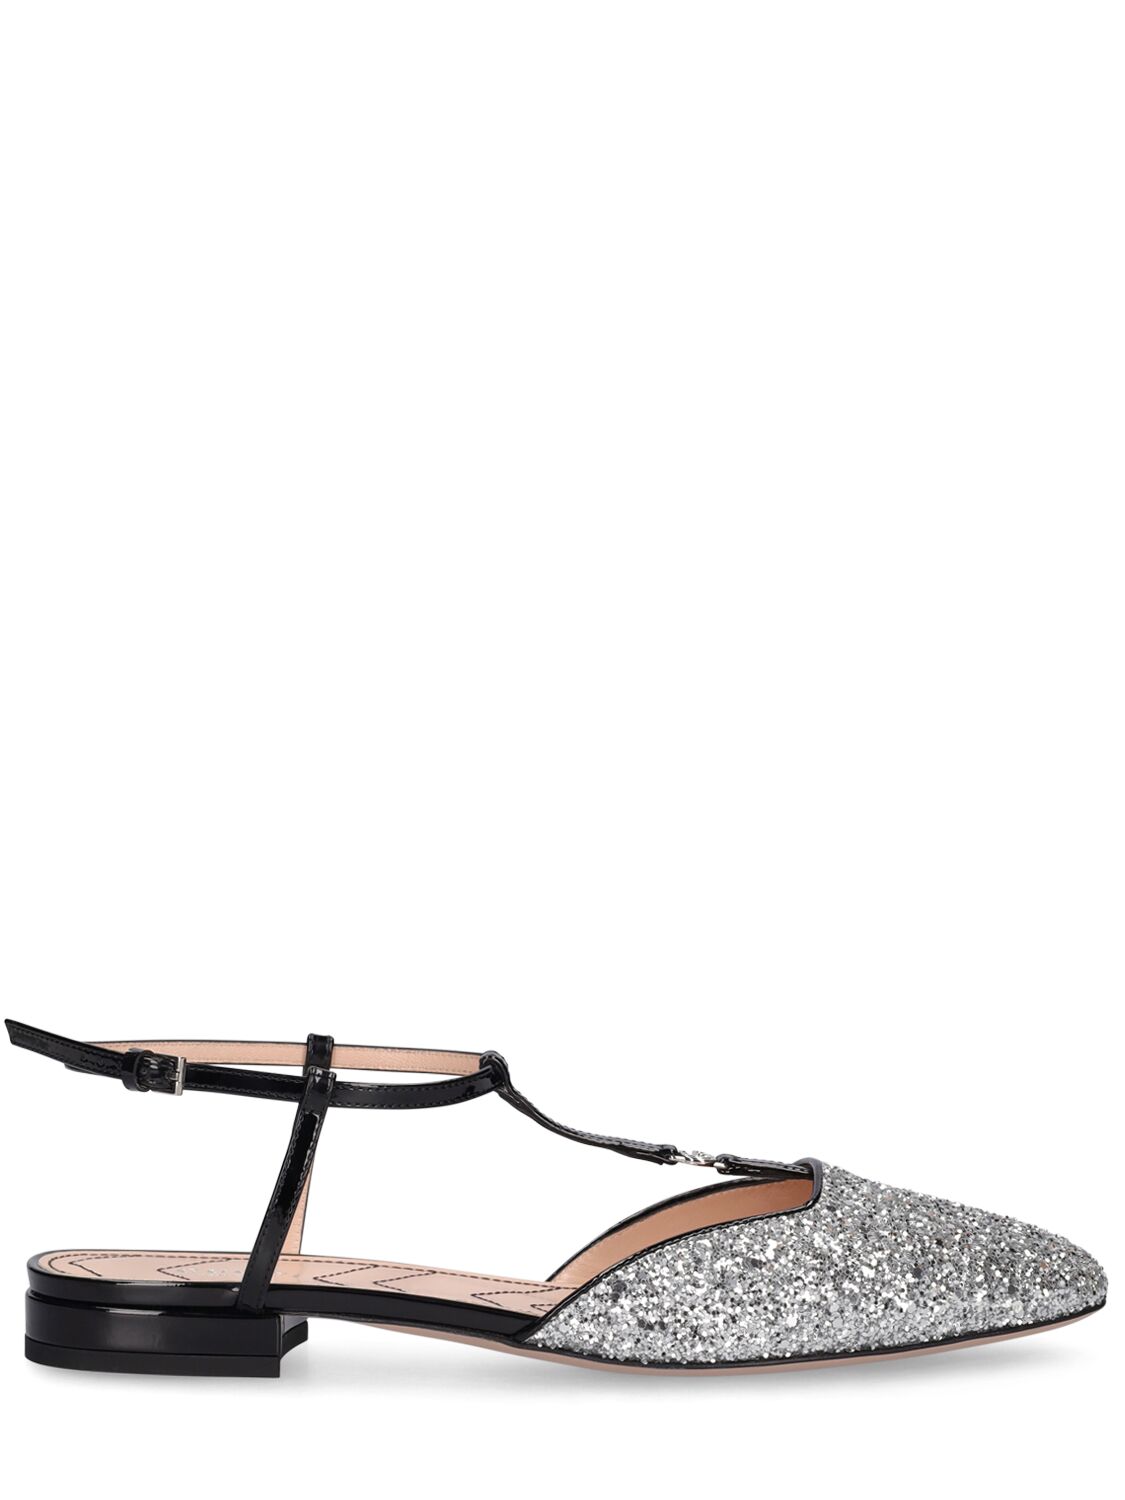 Gucci Double G Glitter Ballerina Shoes In Silver